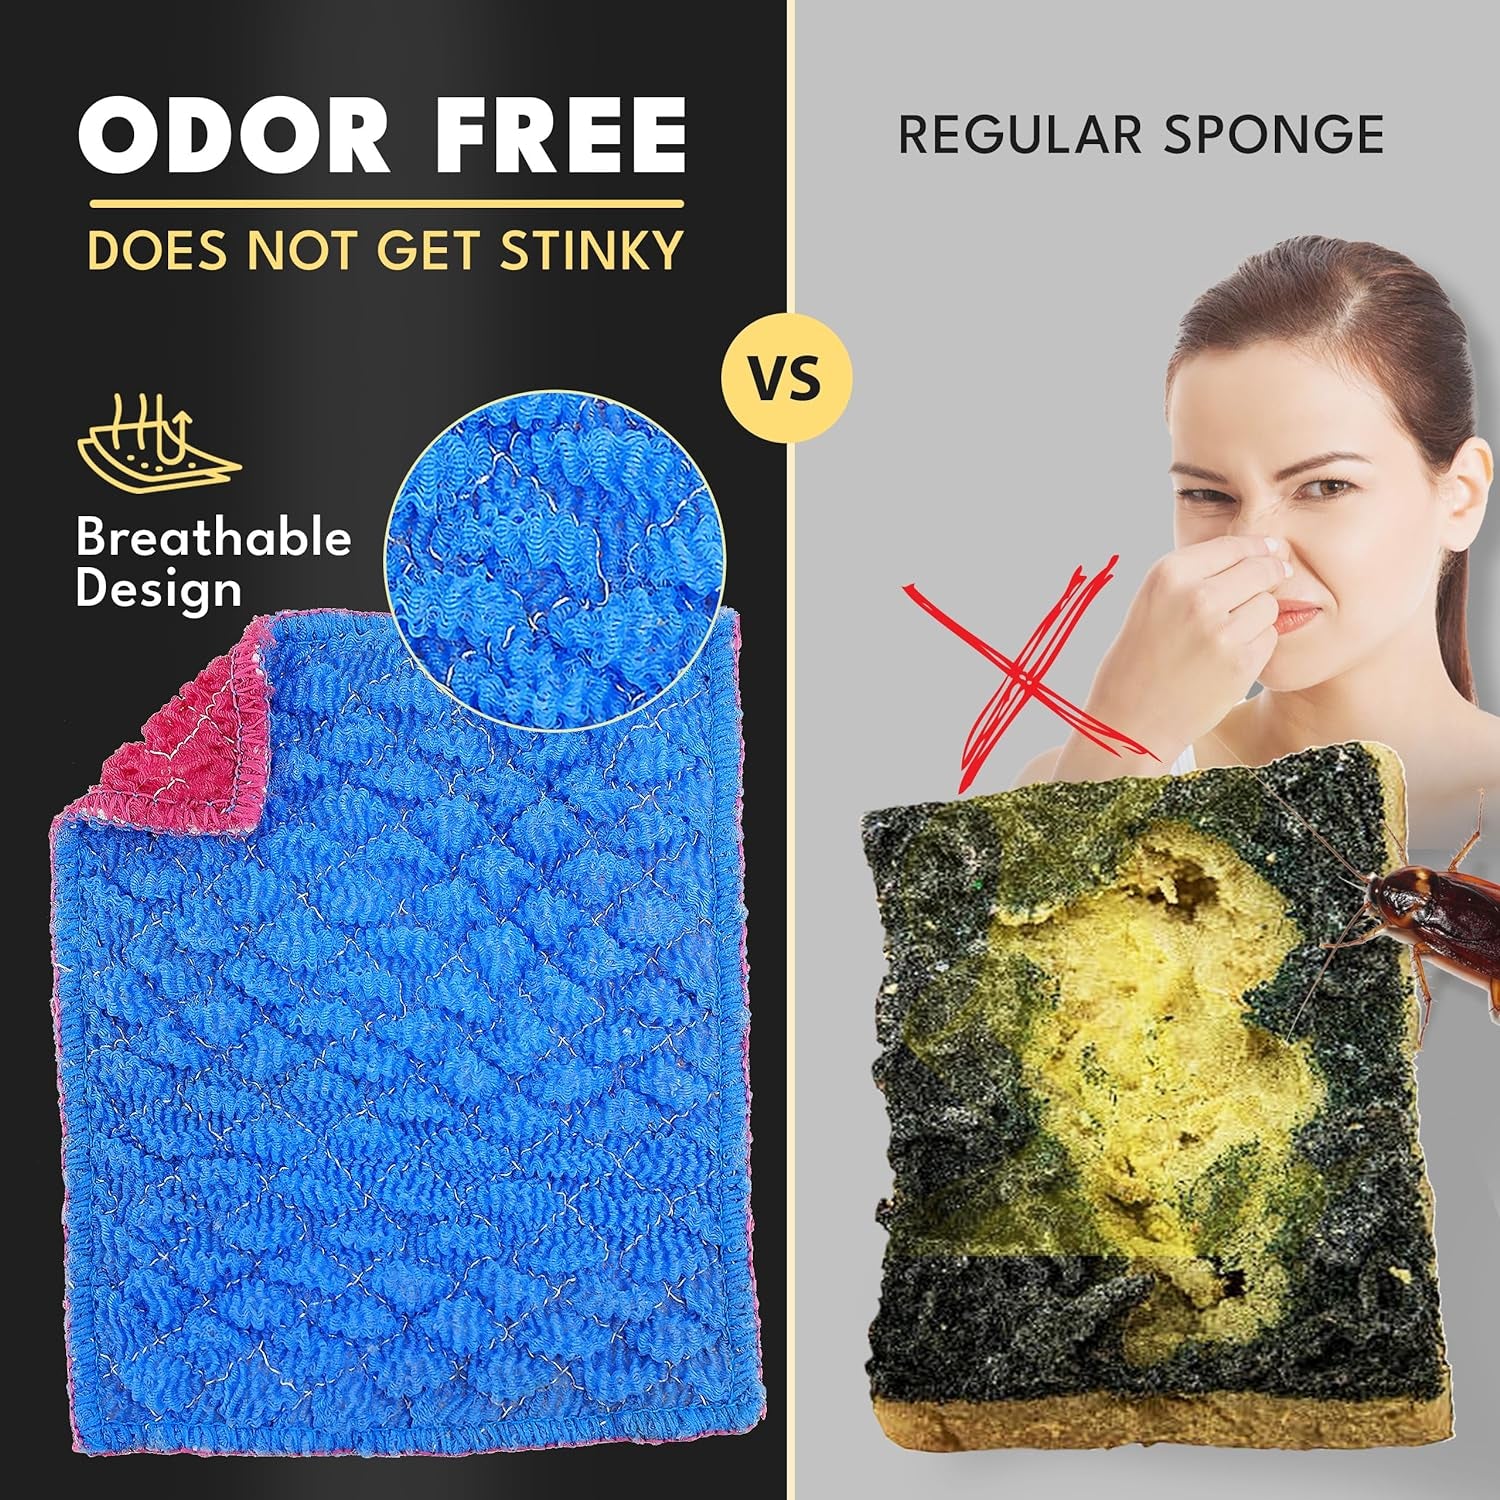 No Odor Scrub Pads (3PK) - Best Alternative to Kitchen Sponges and Scrubbers - Ecofriendly Reusable Sponge & Scrubber for Cleaning Dishes - All Purpose Scrubbing Pads - Dishwashing, Camping